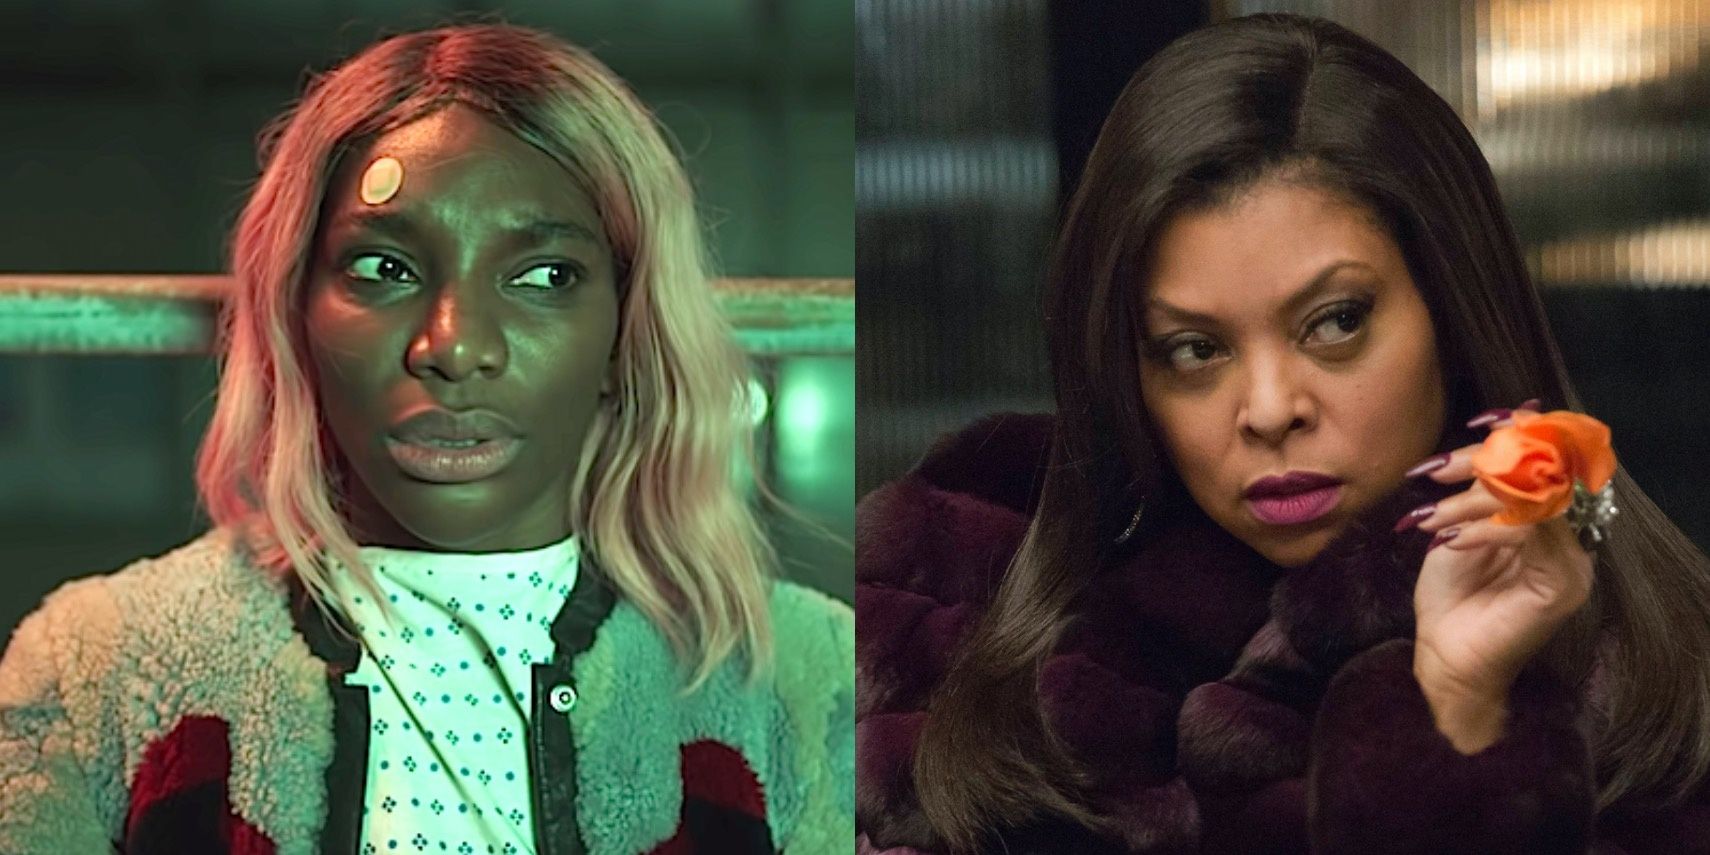 The Best Black Female Leads In TV & Film (From The Last Decade